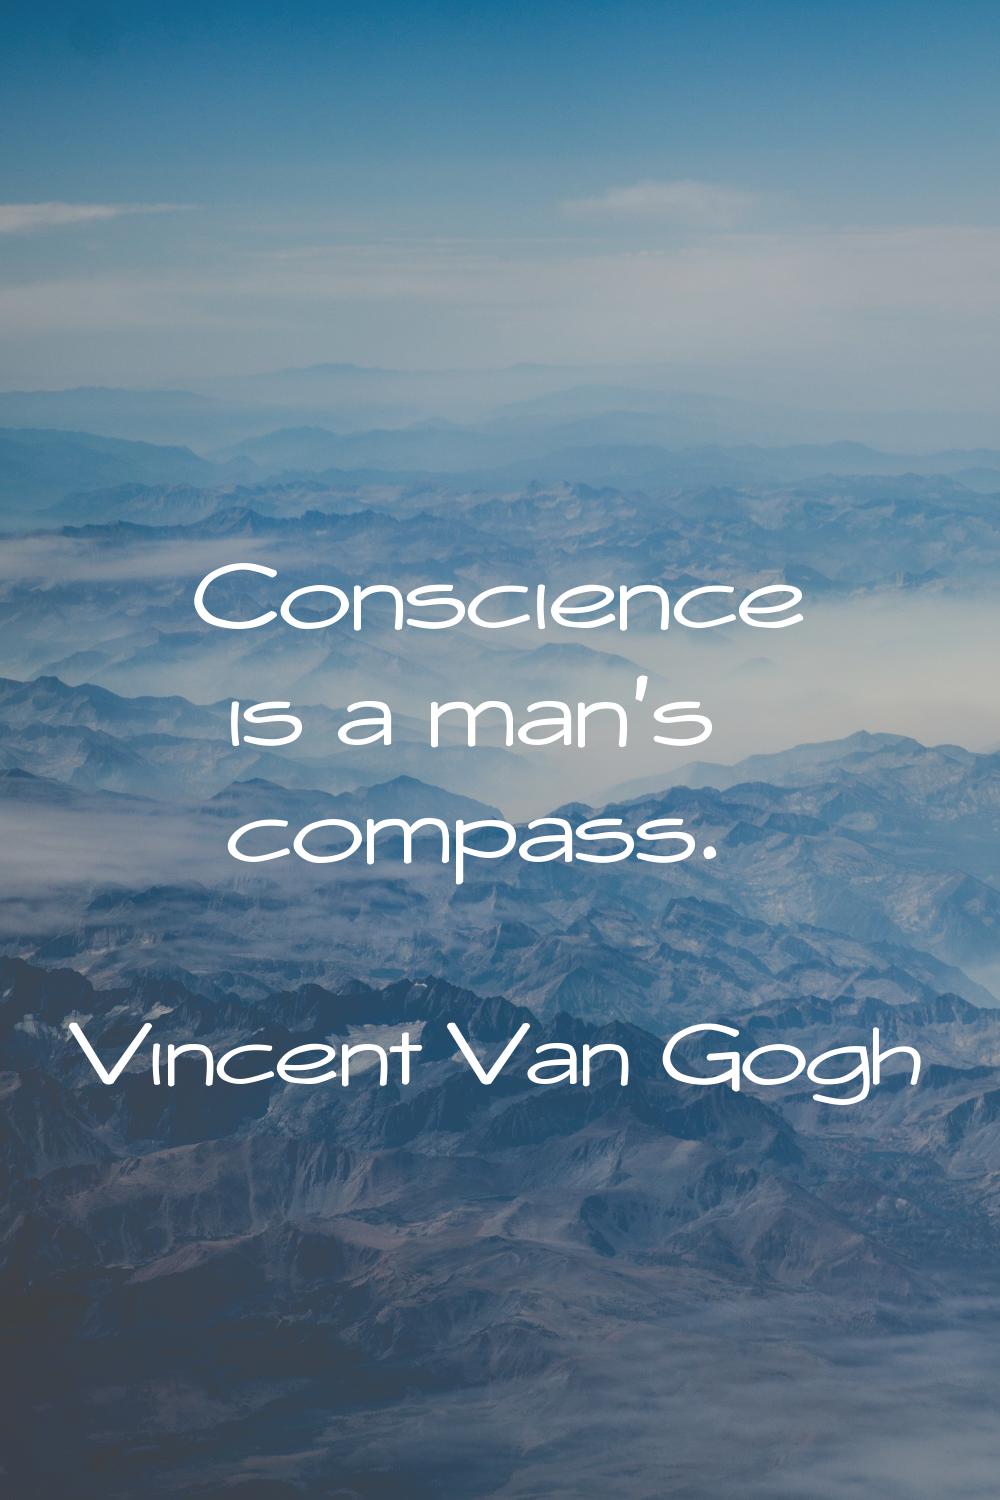 Conscience is a man's compass.